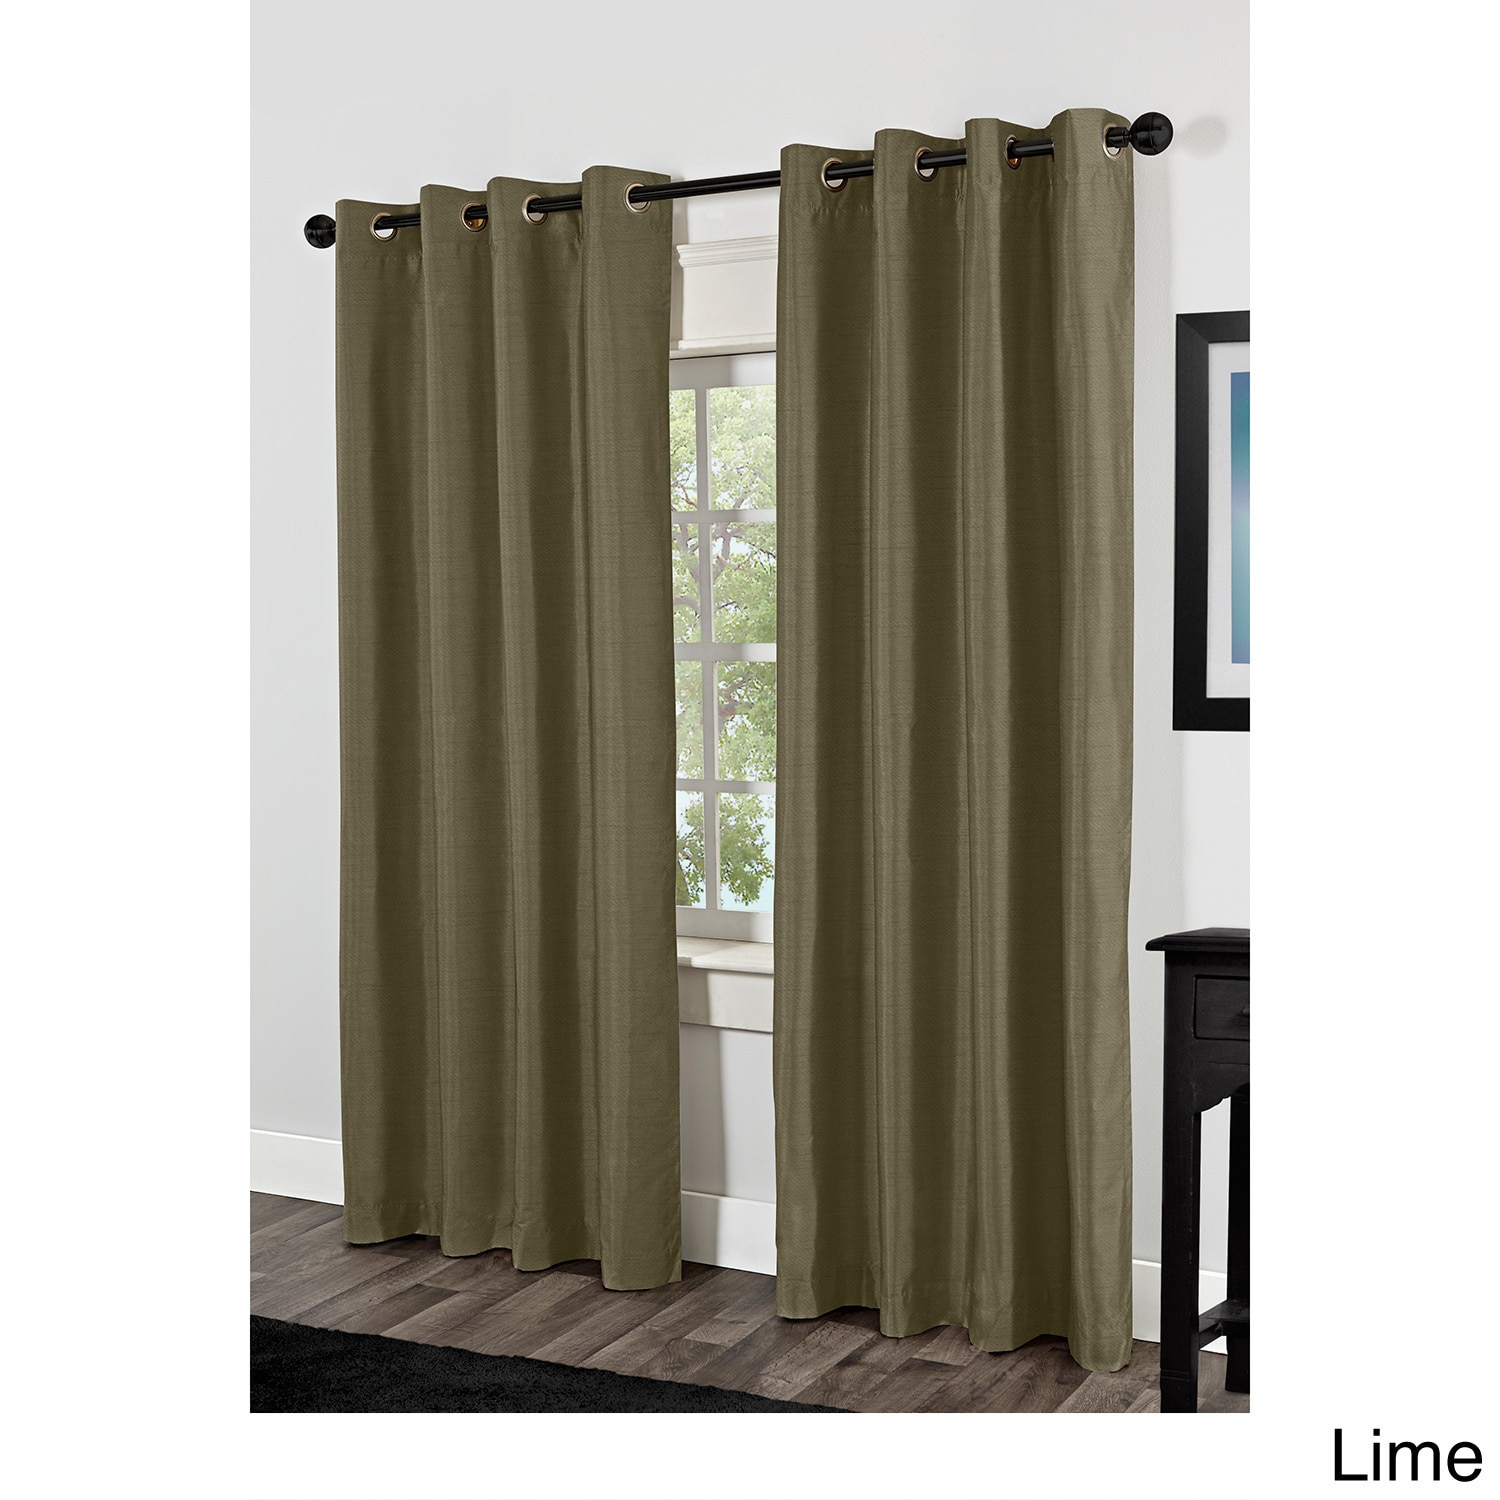 Amalgamated Textiles Inc. Shantung Thermal Insulated Grommet Top 84 Inch Curtain Panel Pair Green Size 54 x 84